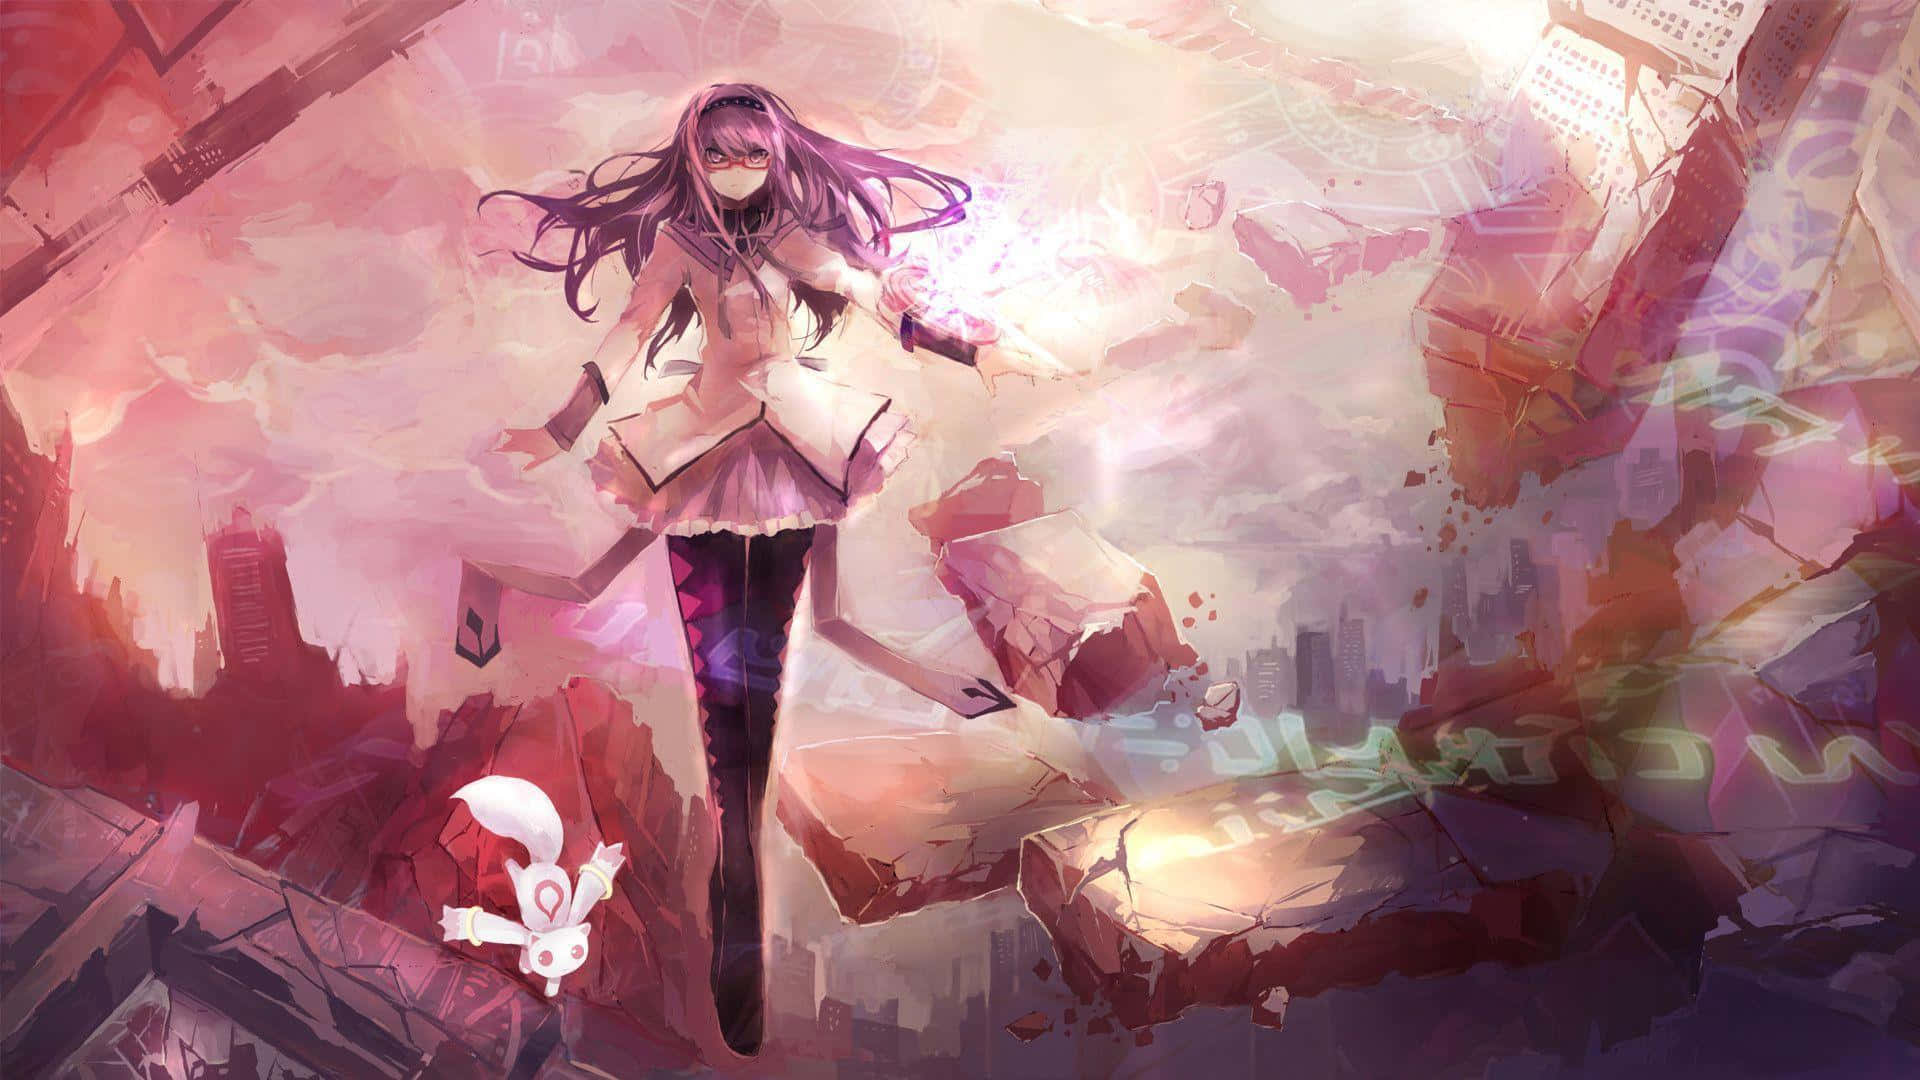 Madoka Kaname surrounded by mysterious magic